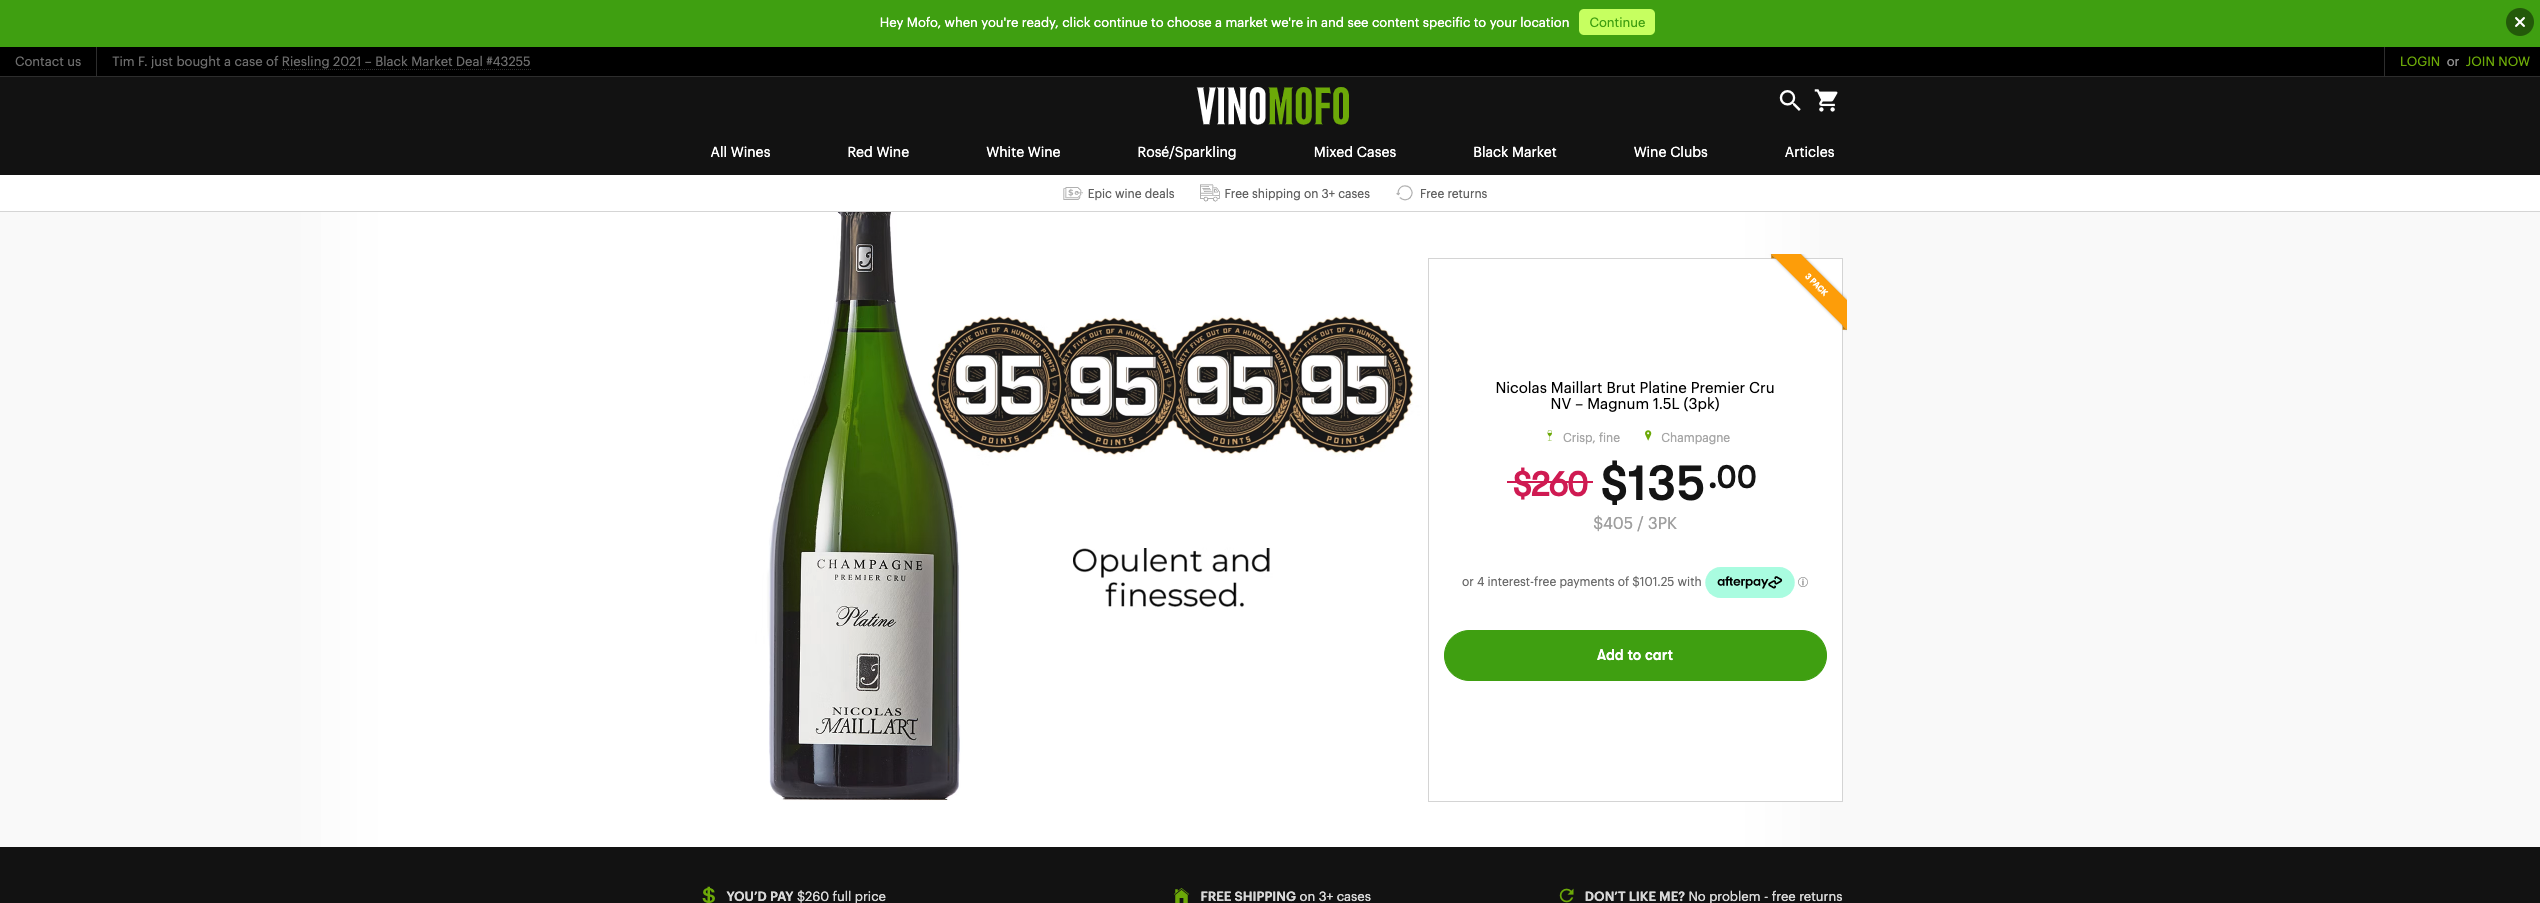 Vinomofo Product Page Example